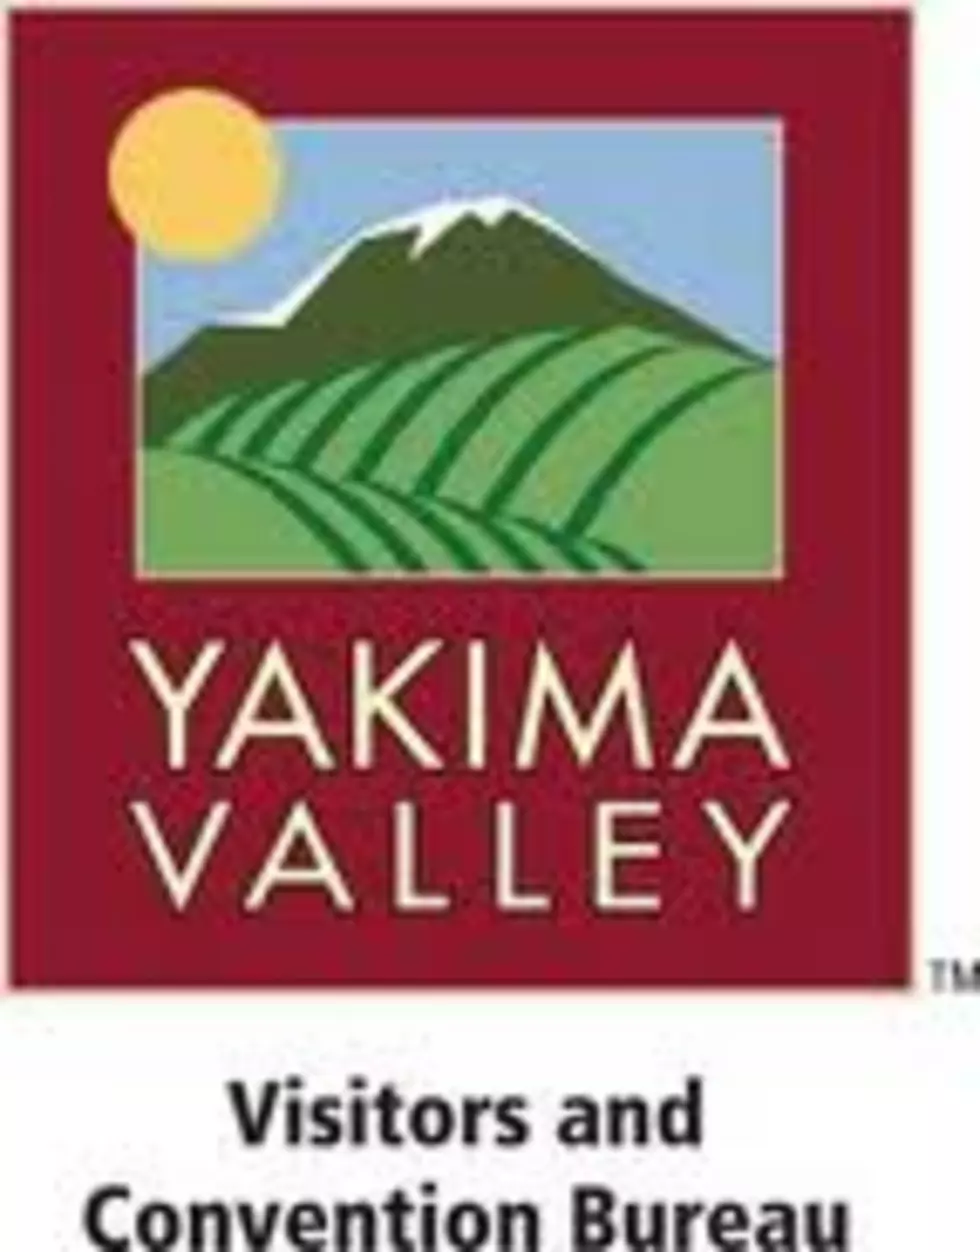 The New Yakima Valley Offical Visitors Guide Is Out